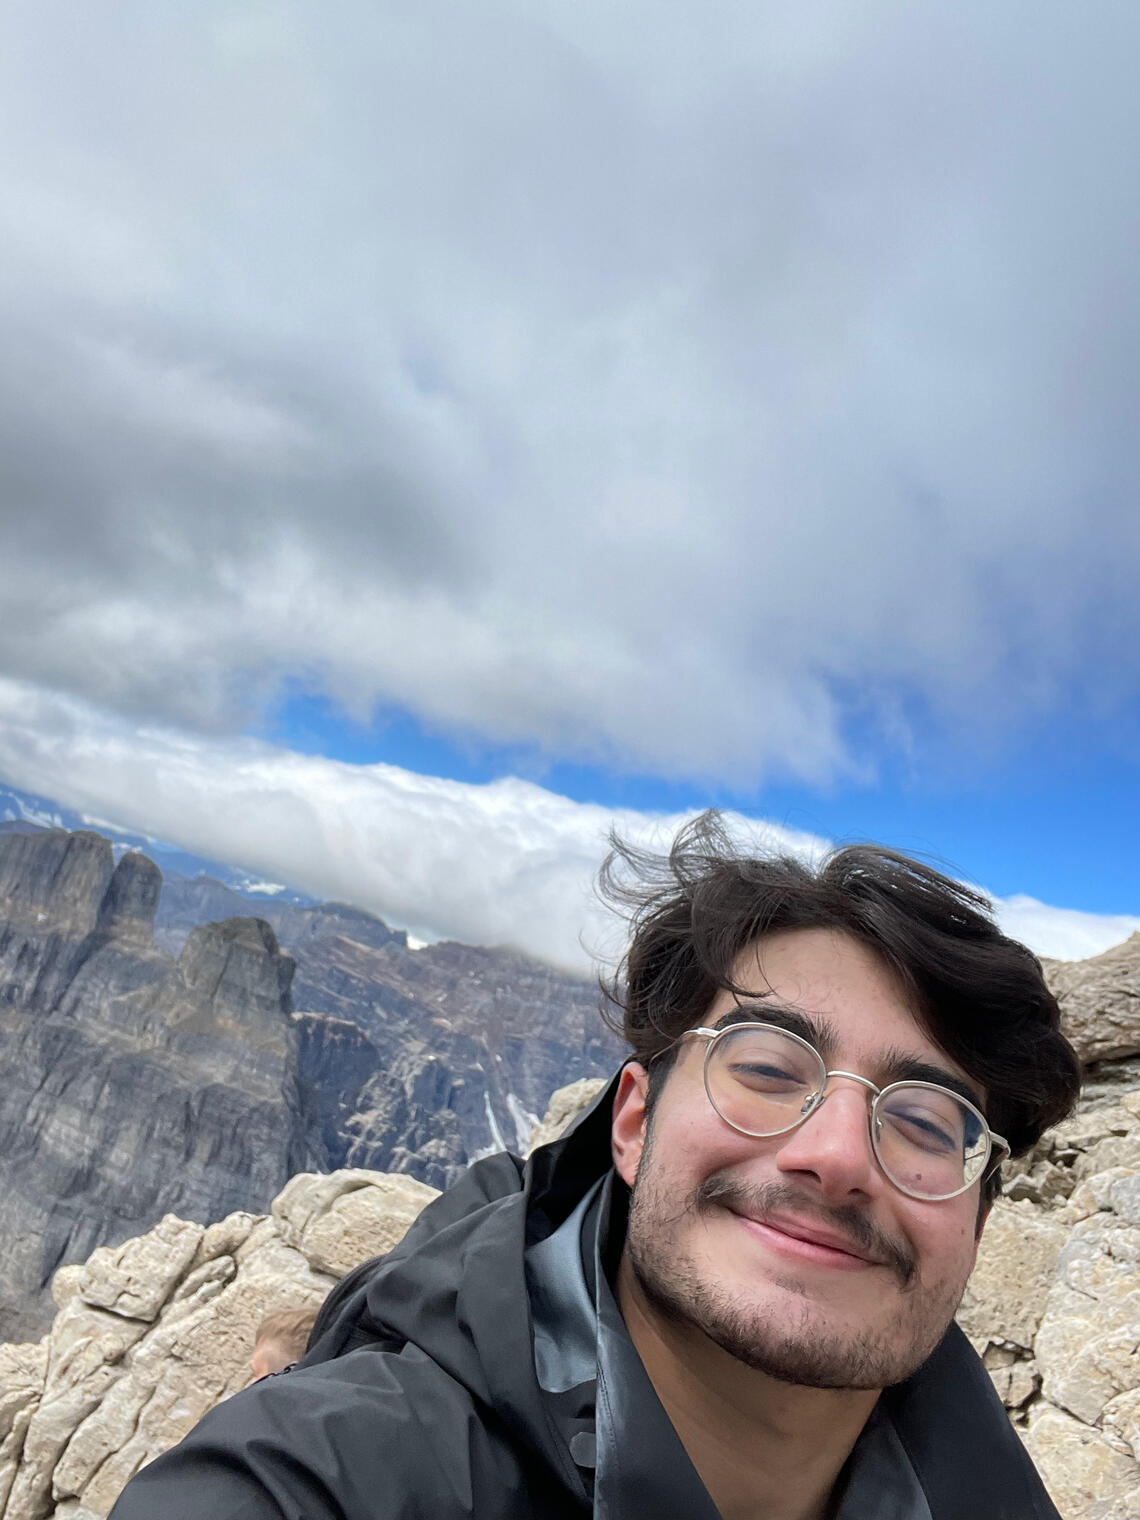 Student selfie with mountains